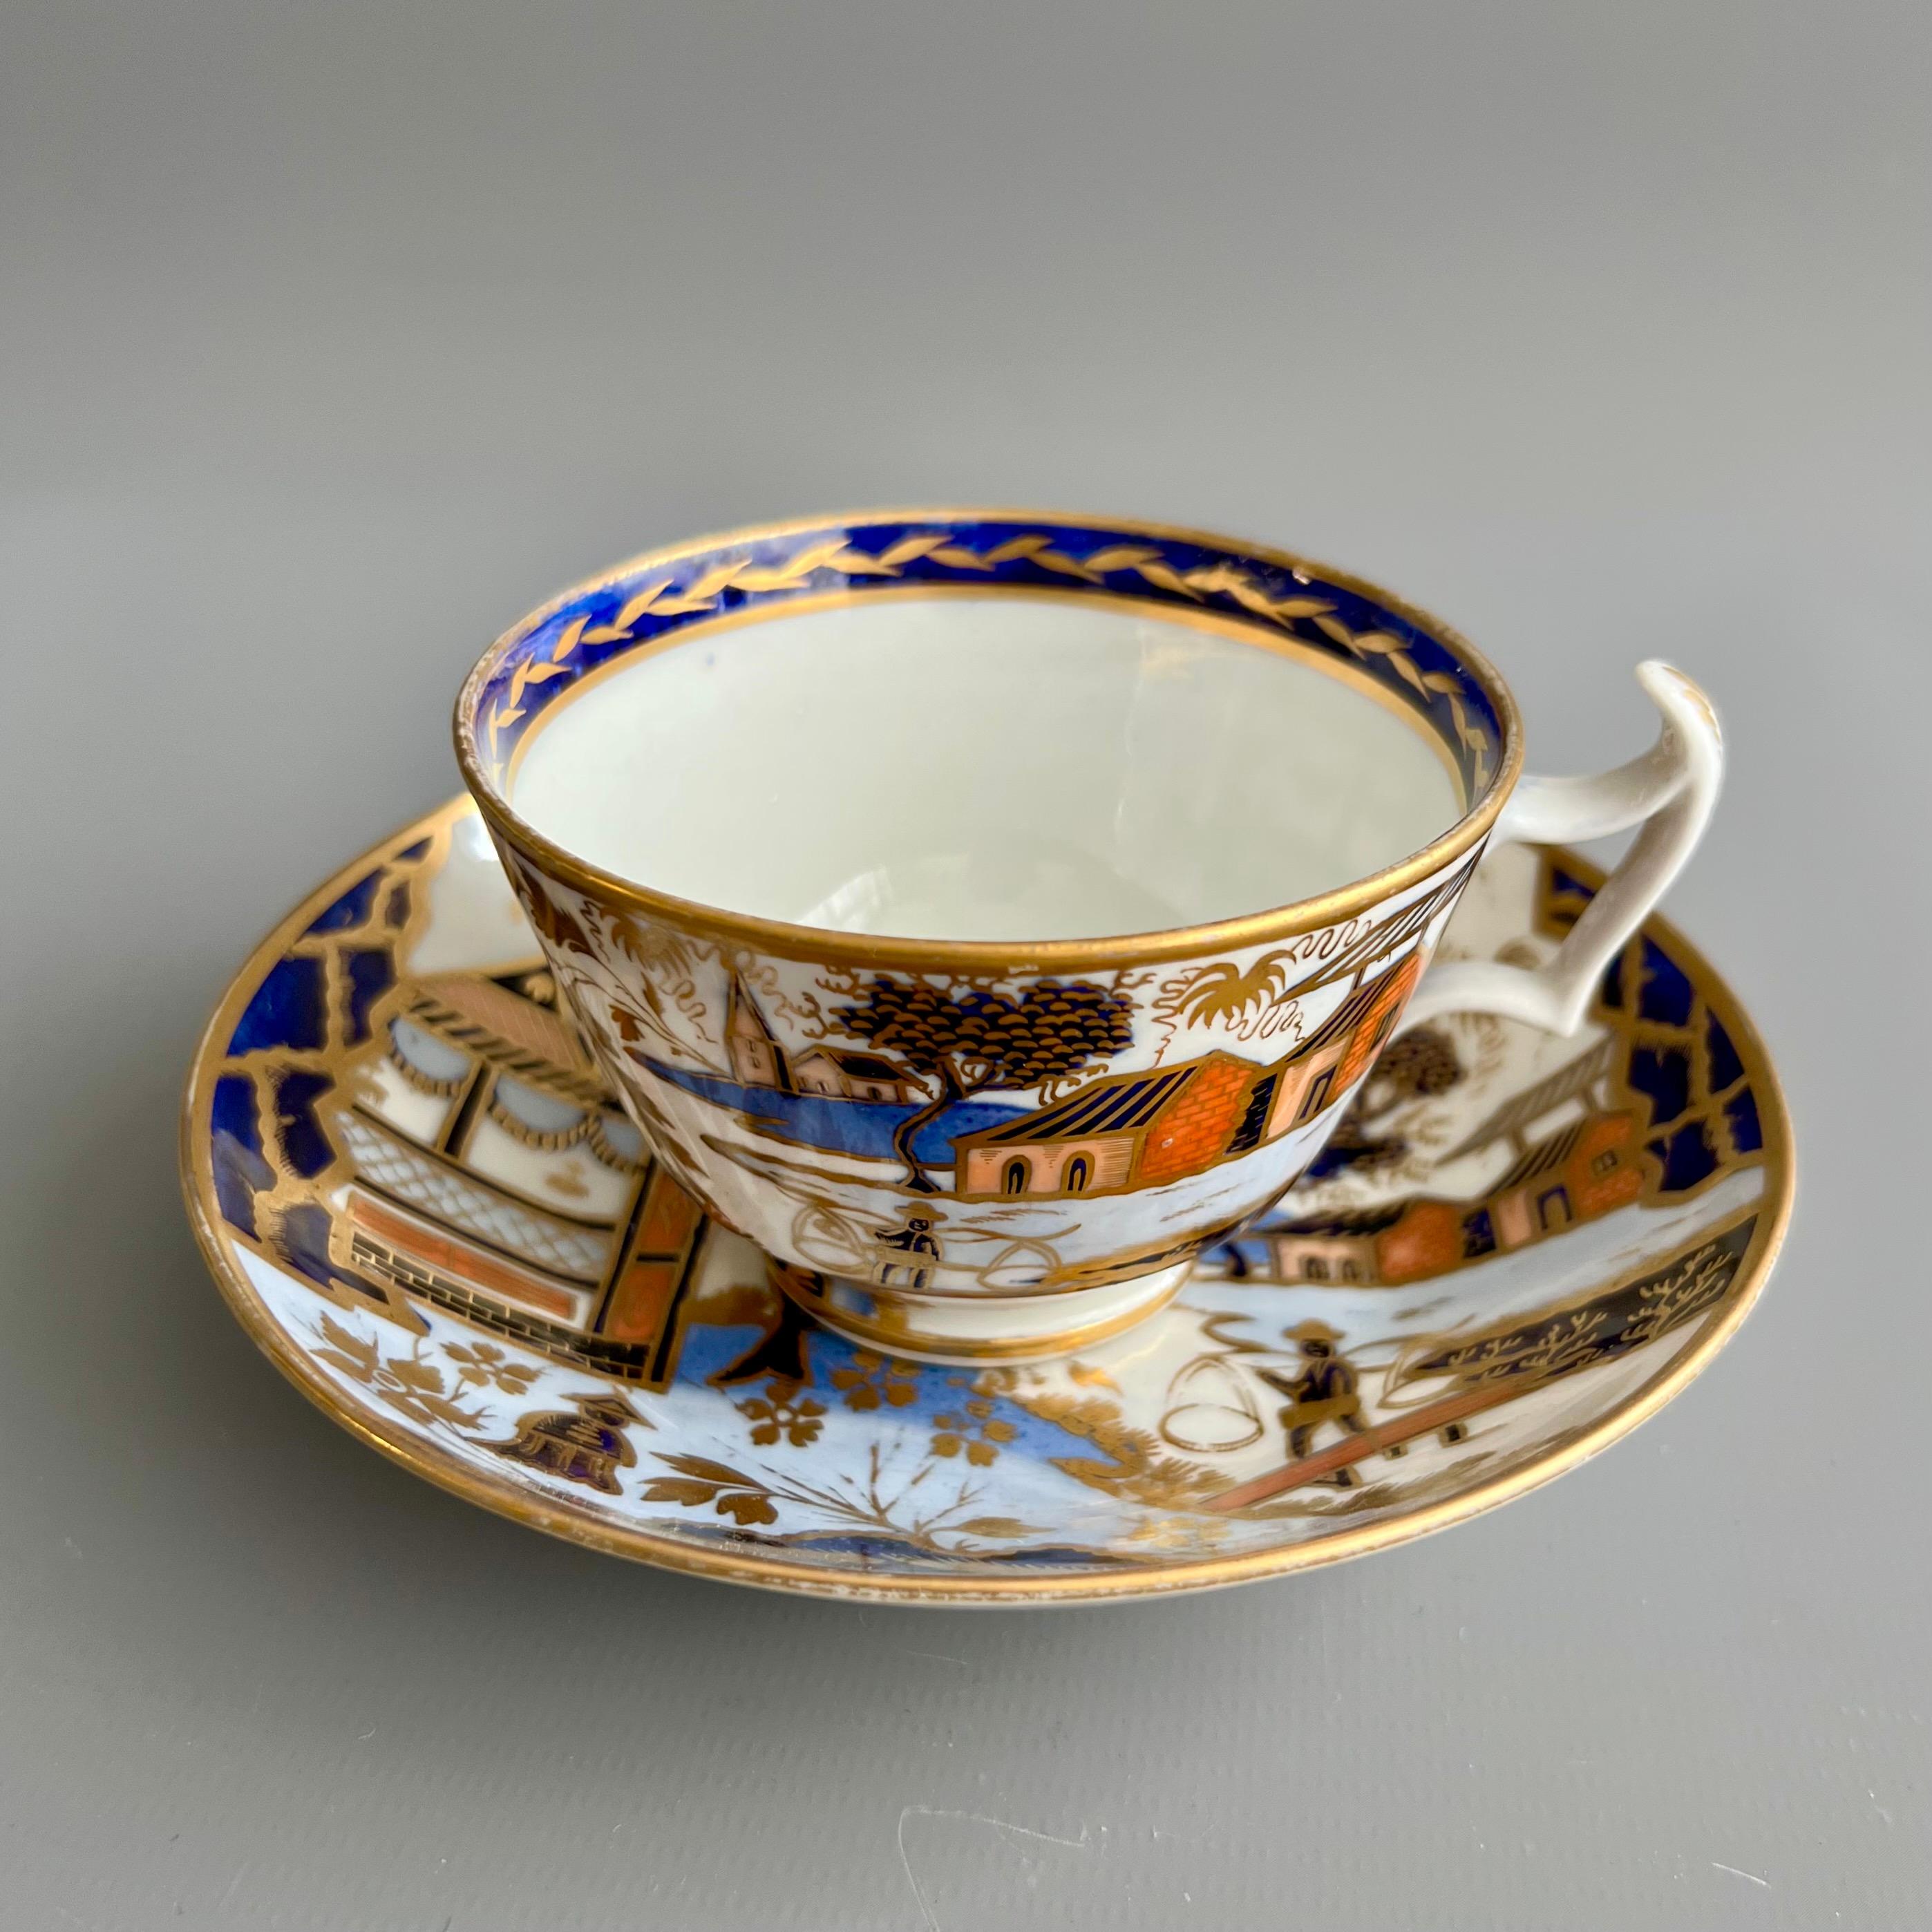 Regency New Hall Porcelain Teacup, Chinoiserie Water Carrier Pattern 1163, Ca 1815